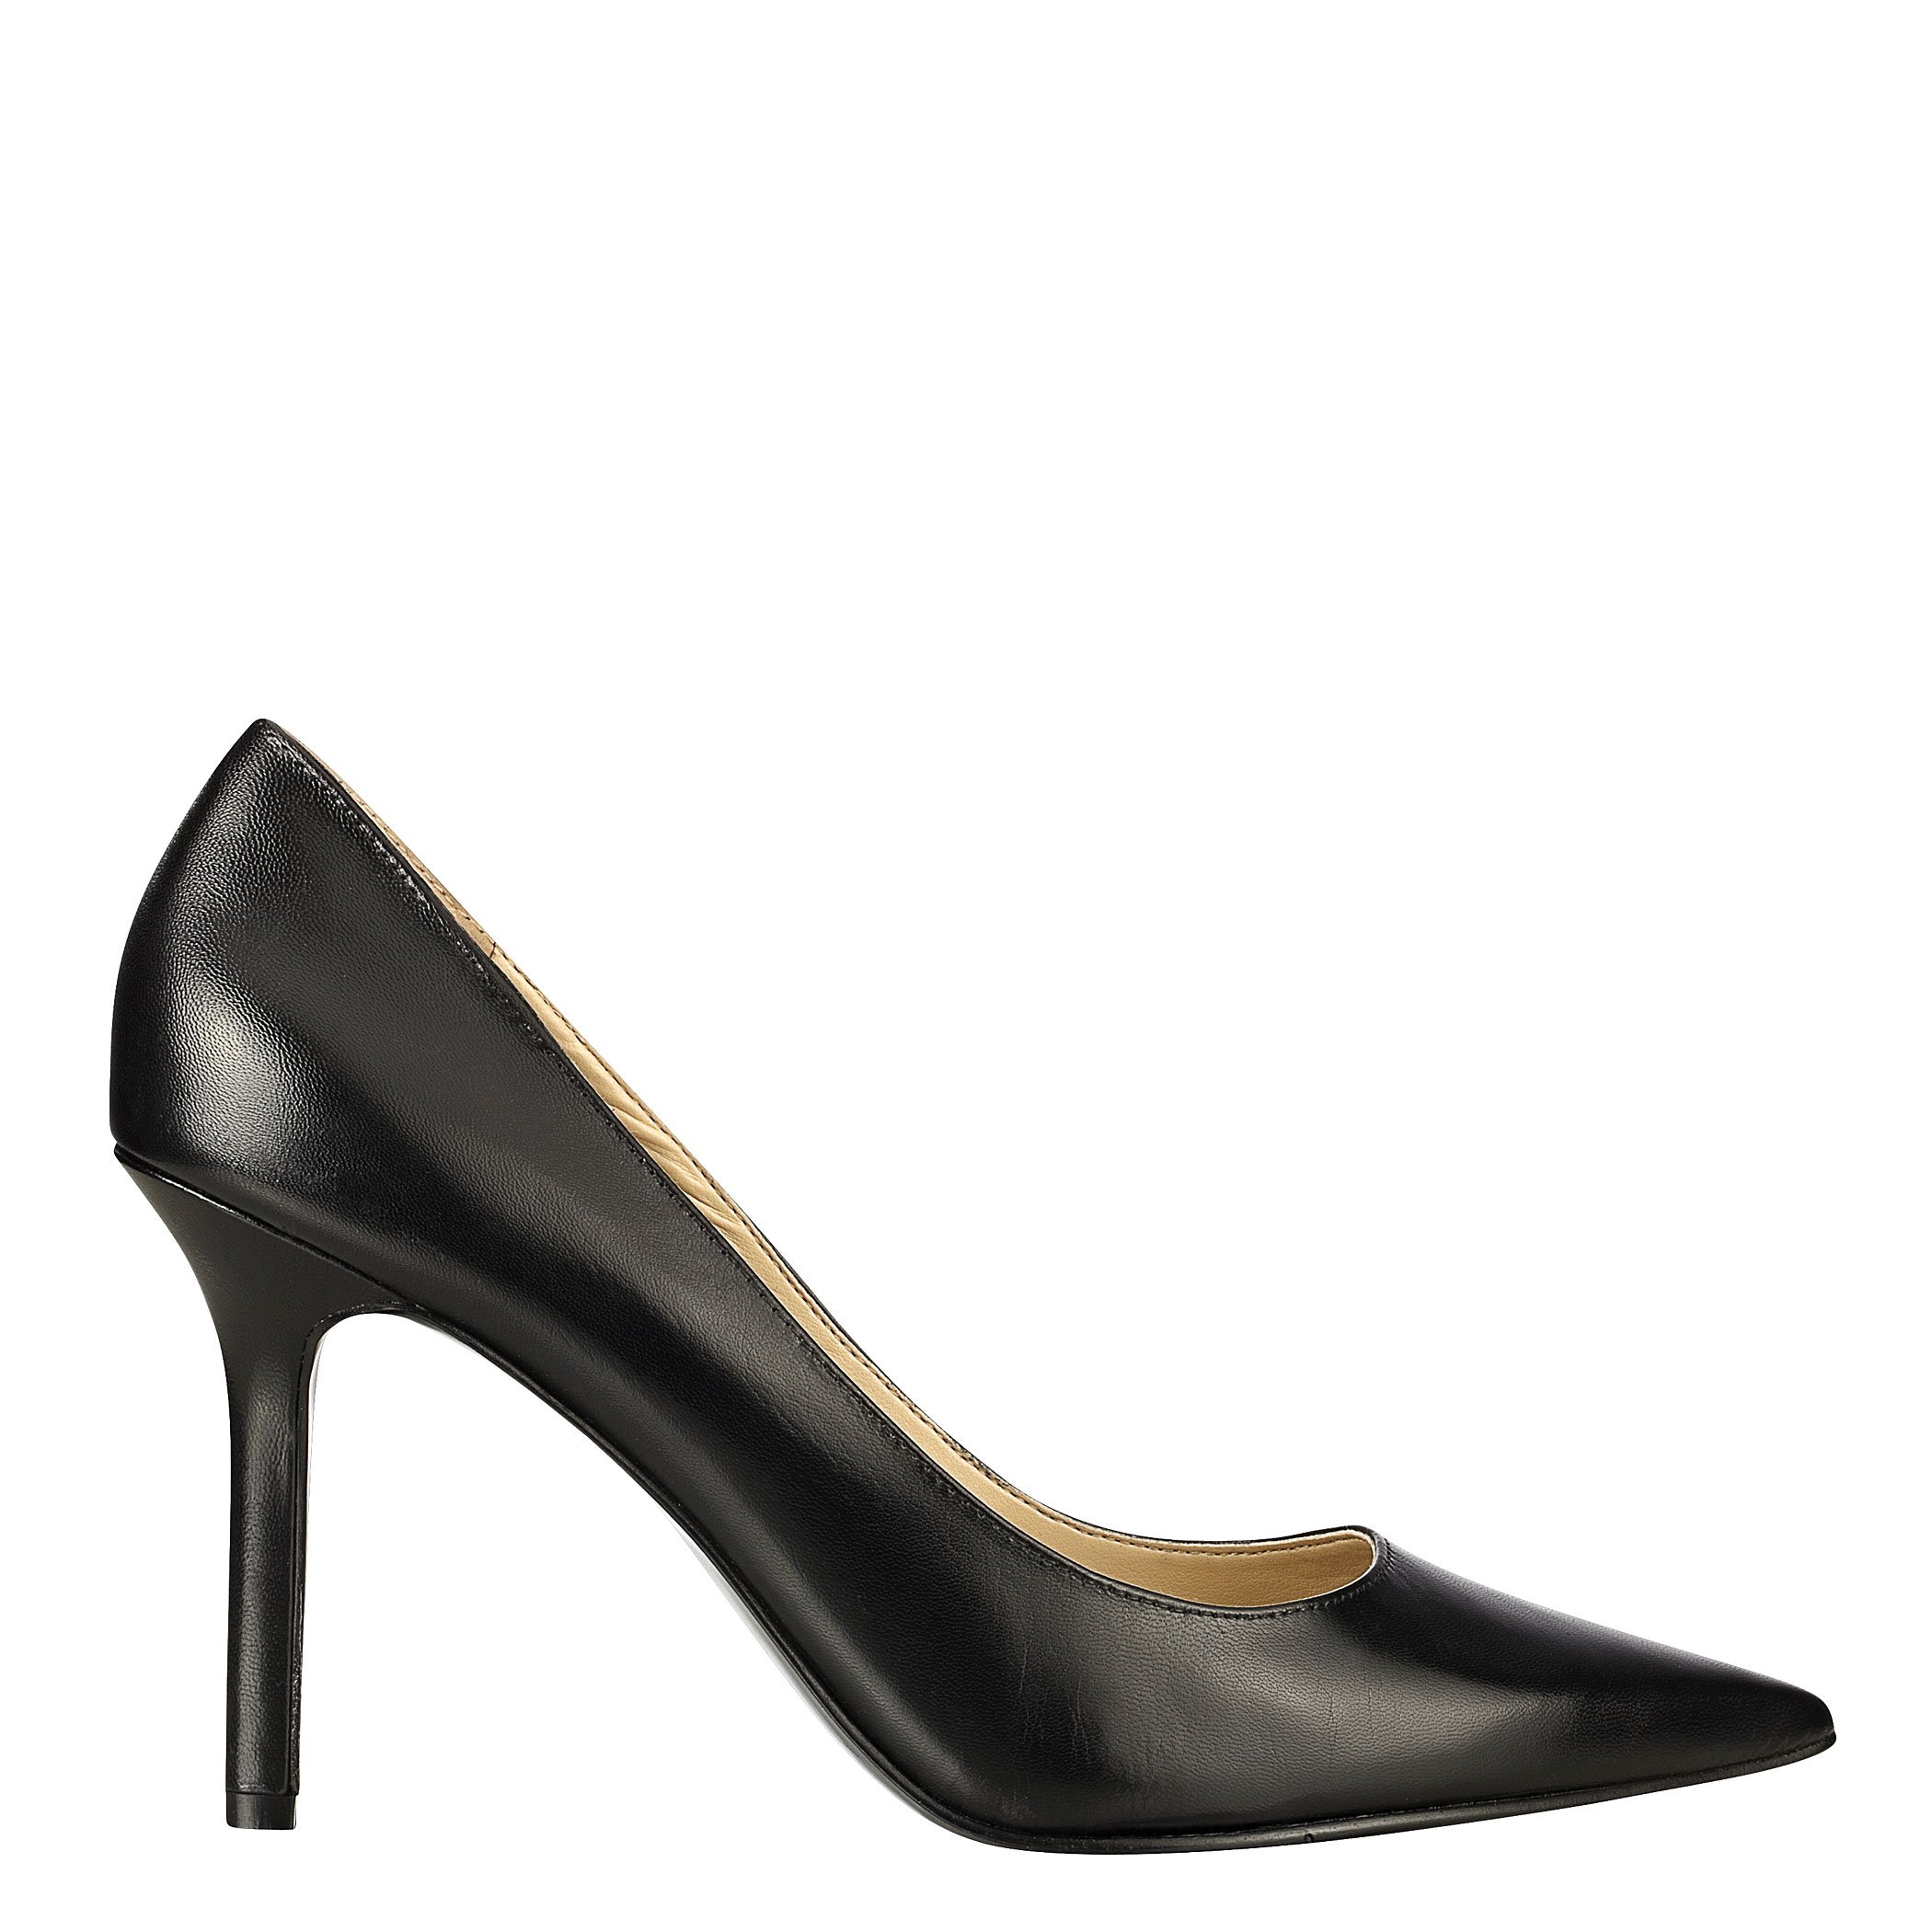 Nine west Martina Pointy Toe Pumps in Black (BLACK LEATHER) | Lyst